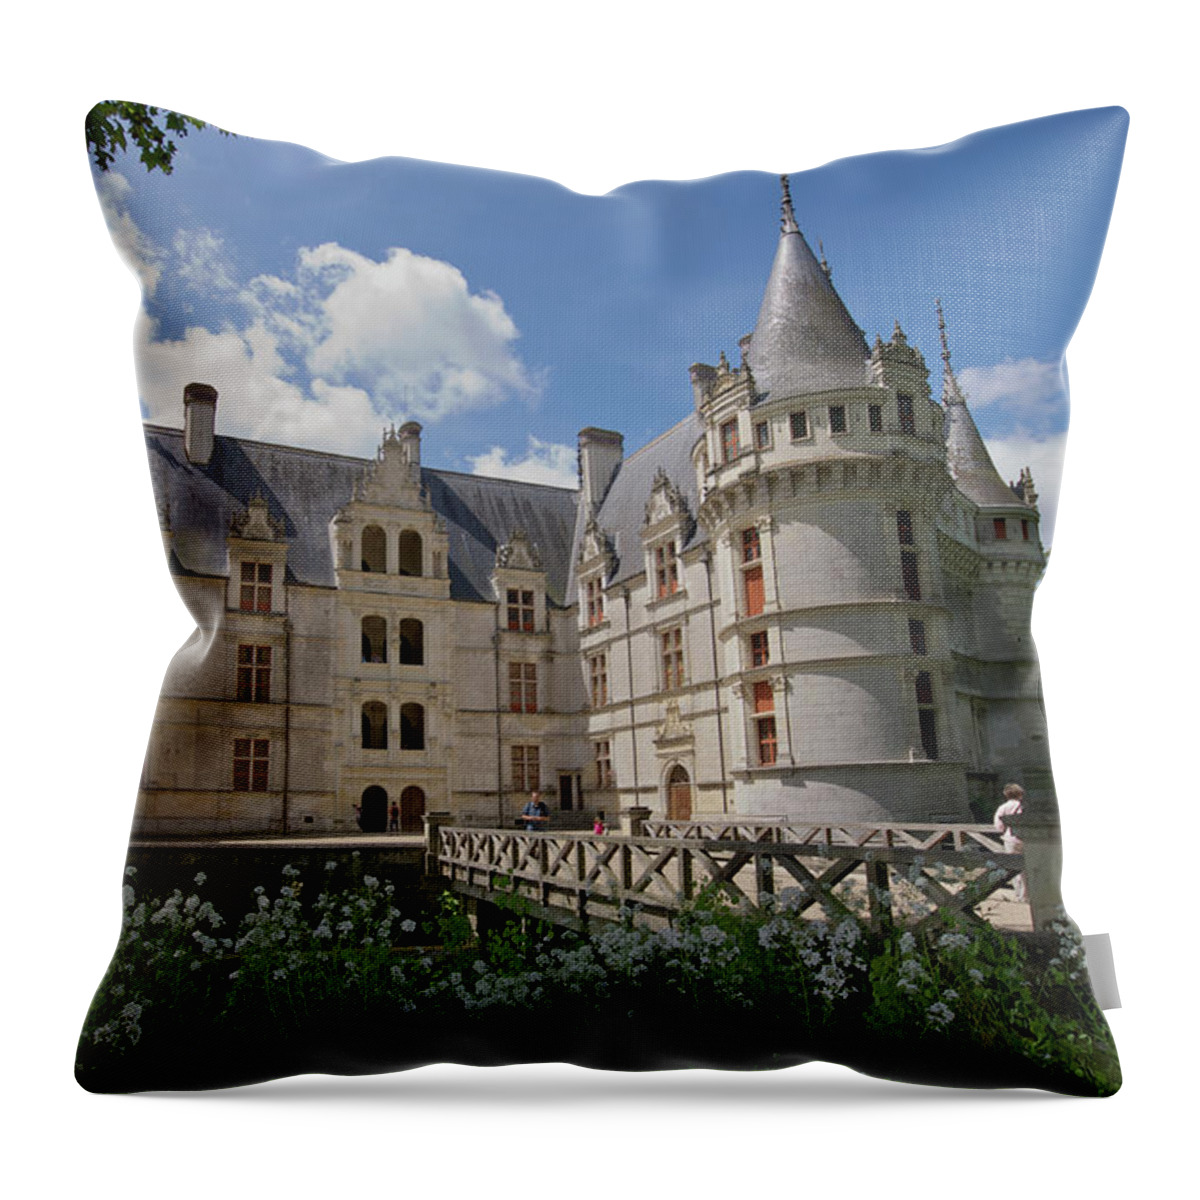 Castle Throw Pillow featuring the photograph Chateau Azay-le-Rideau by Matthew DeGrushe